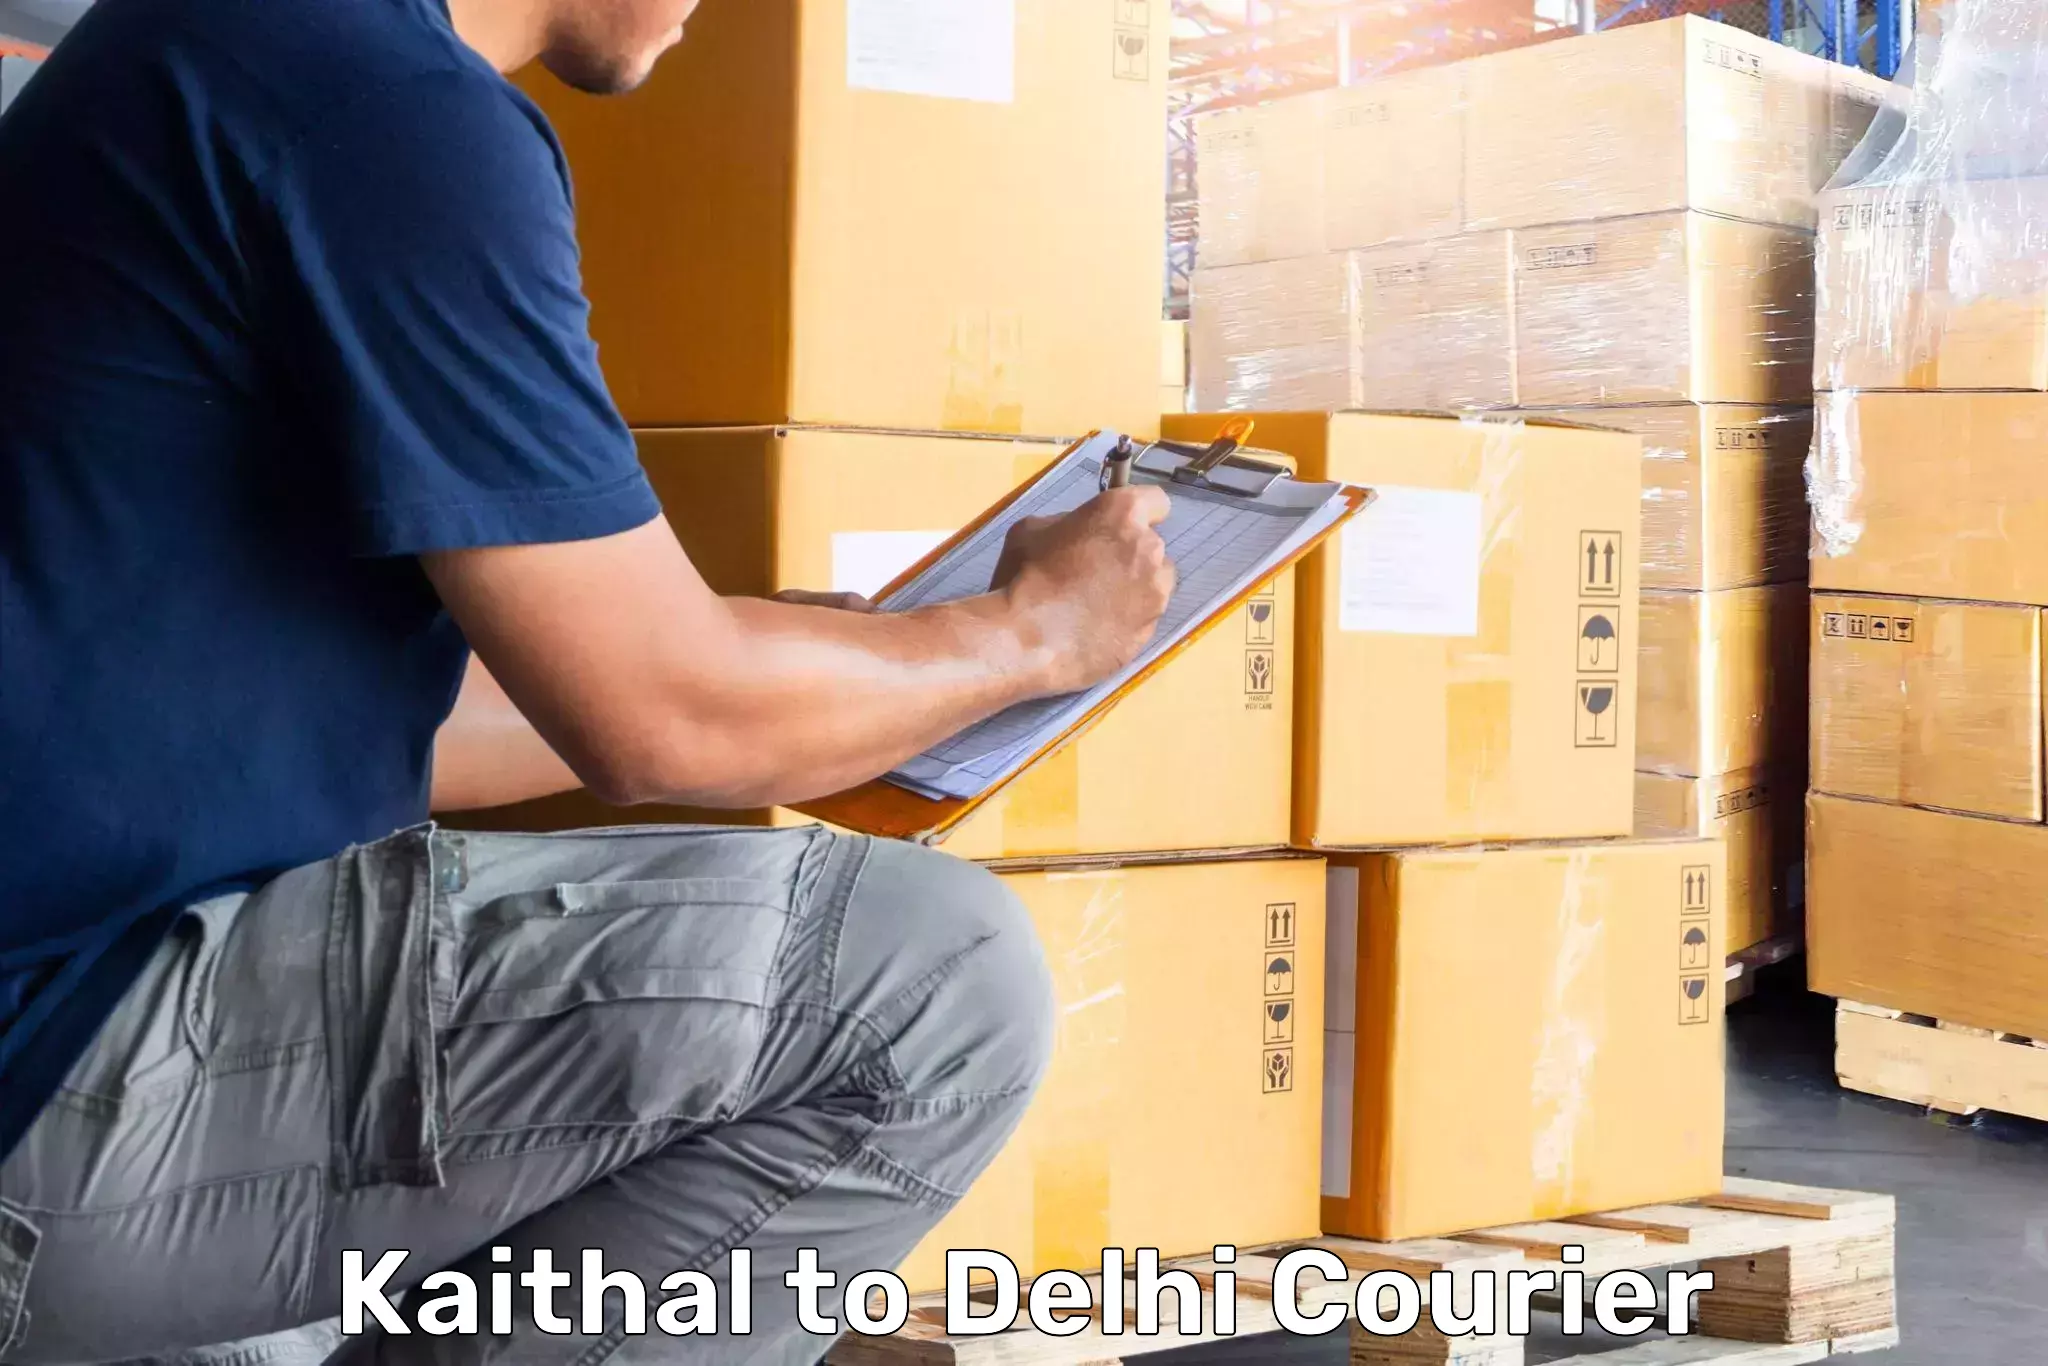 Luggage storage and delivery Kaithal to NCR